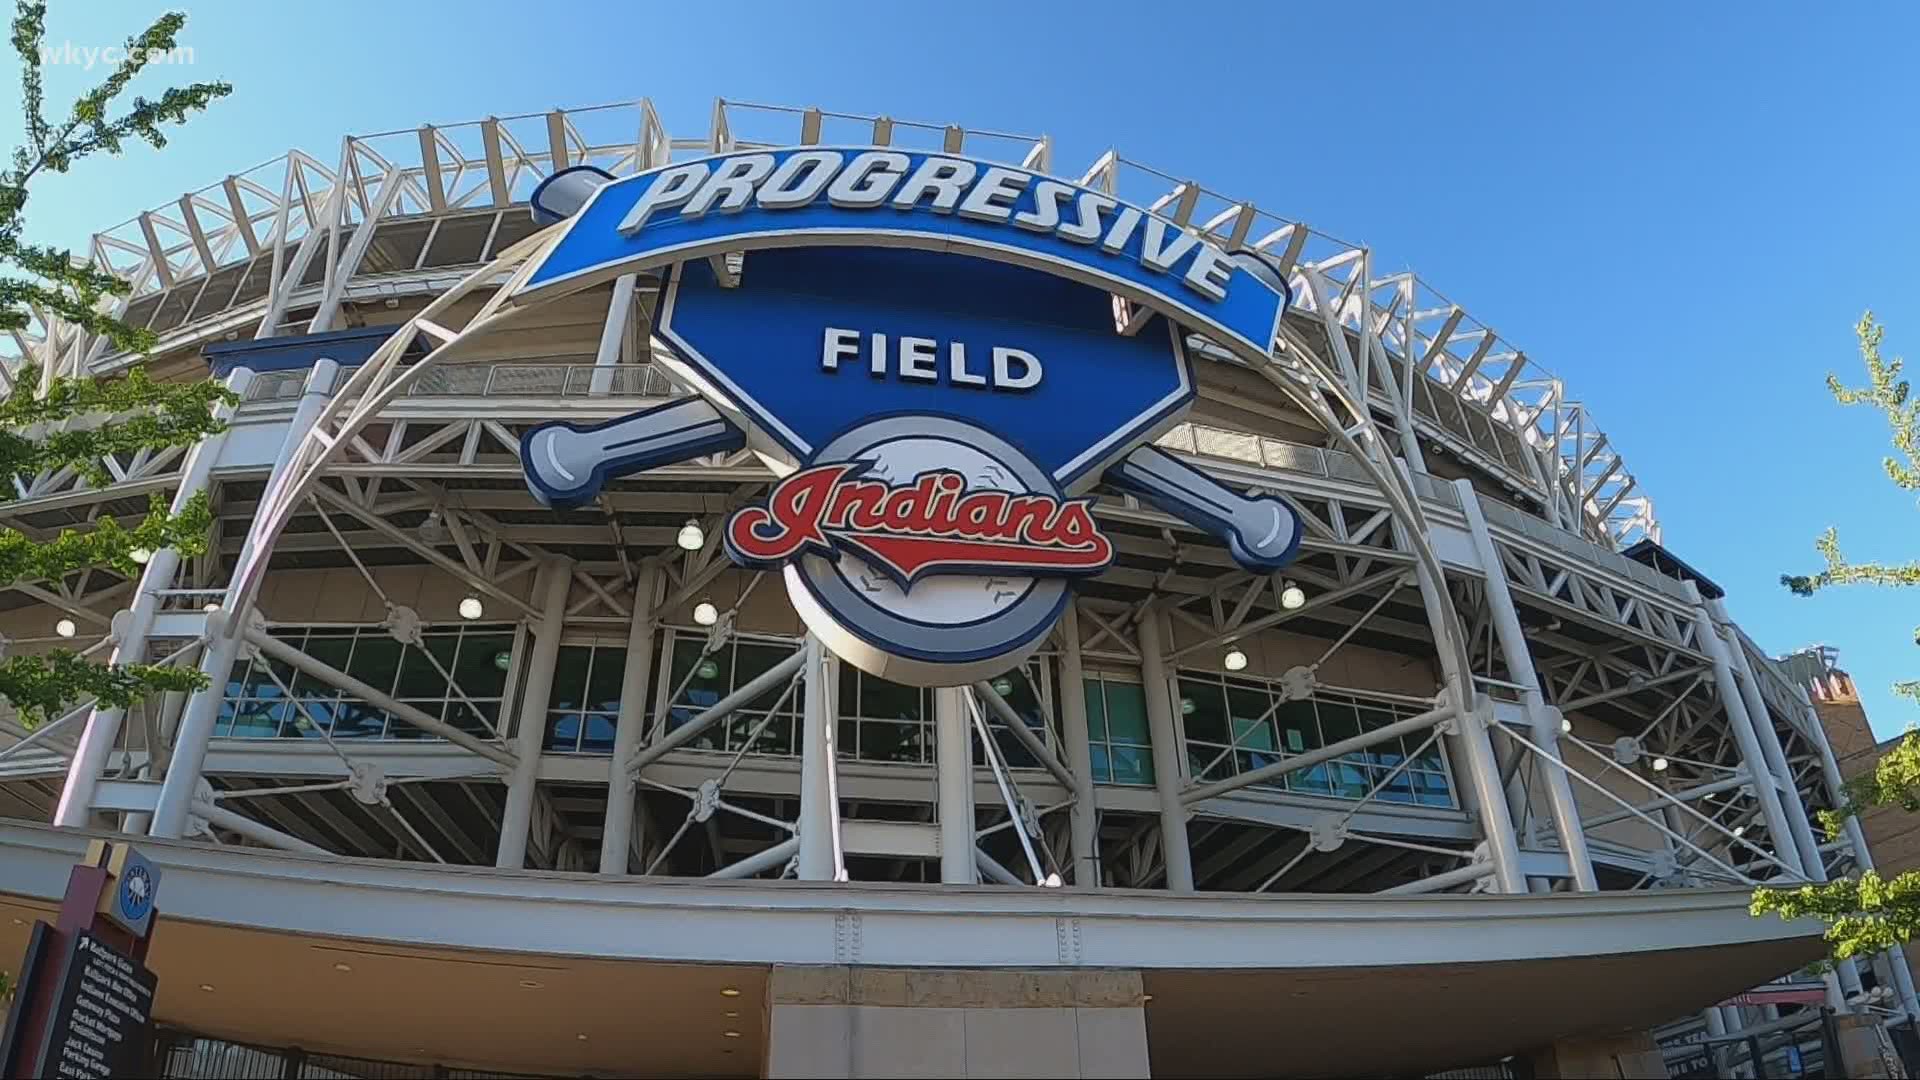 They'll likely be allowed to host approximately 10,500 fans at Progressive Field to start the 2021 season. That is 30 percent of their capacity.